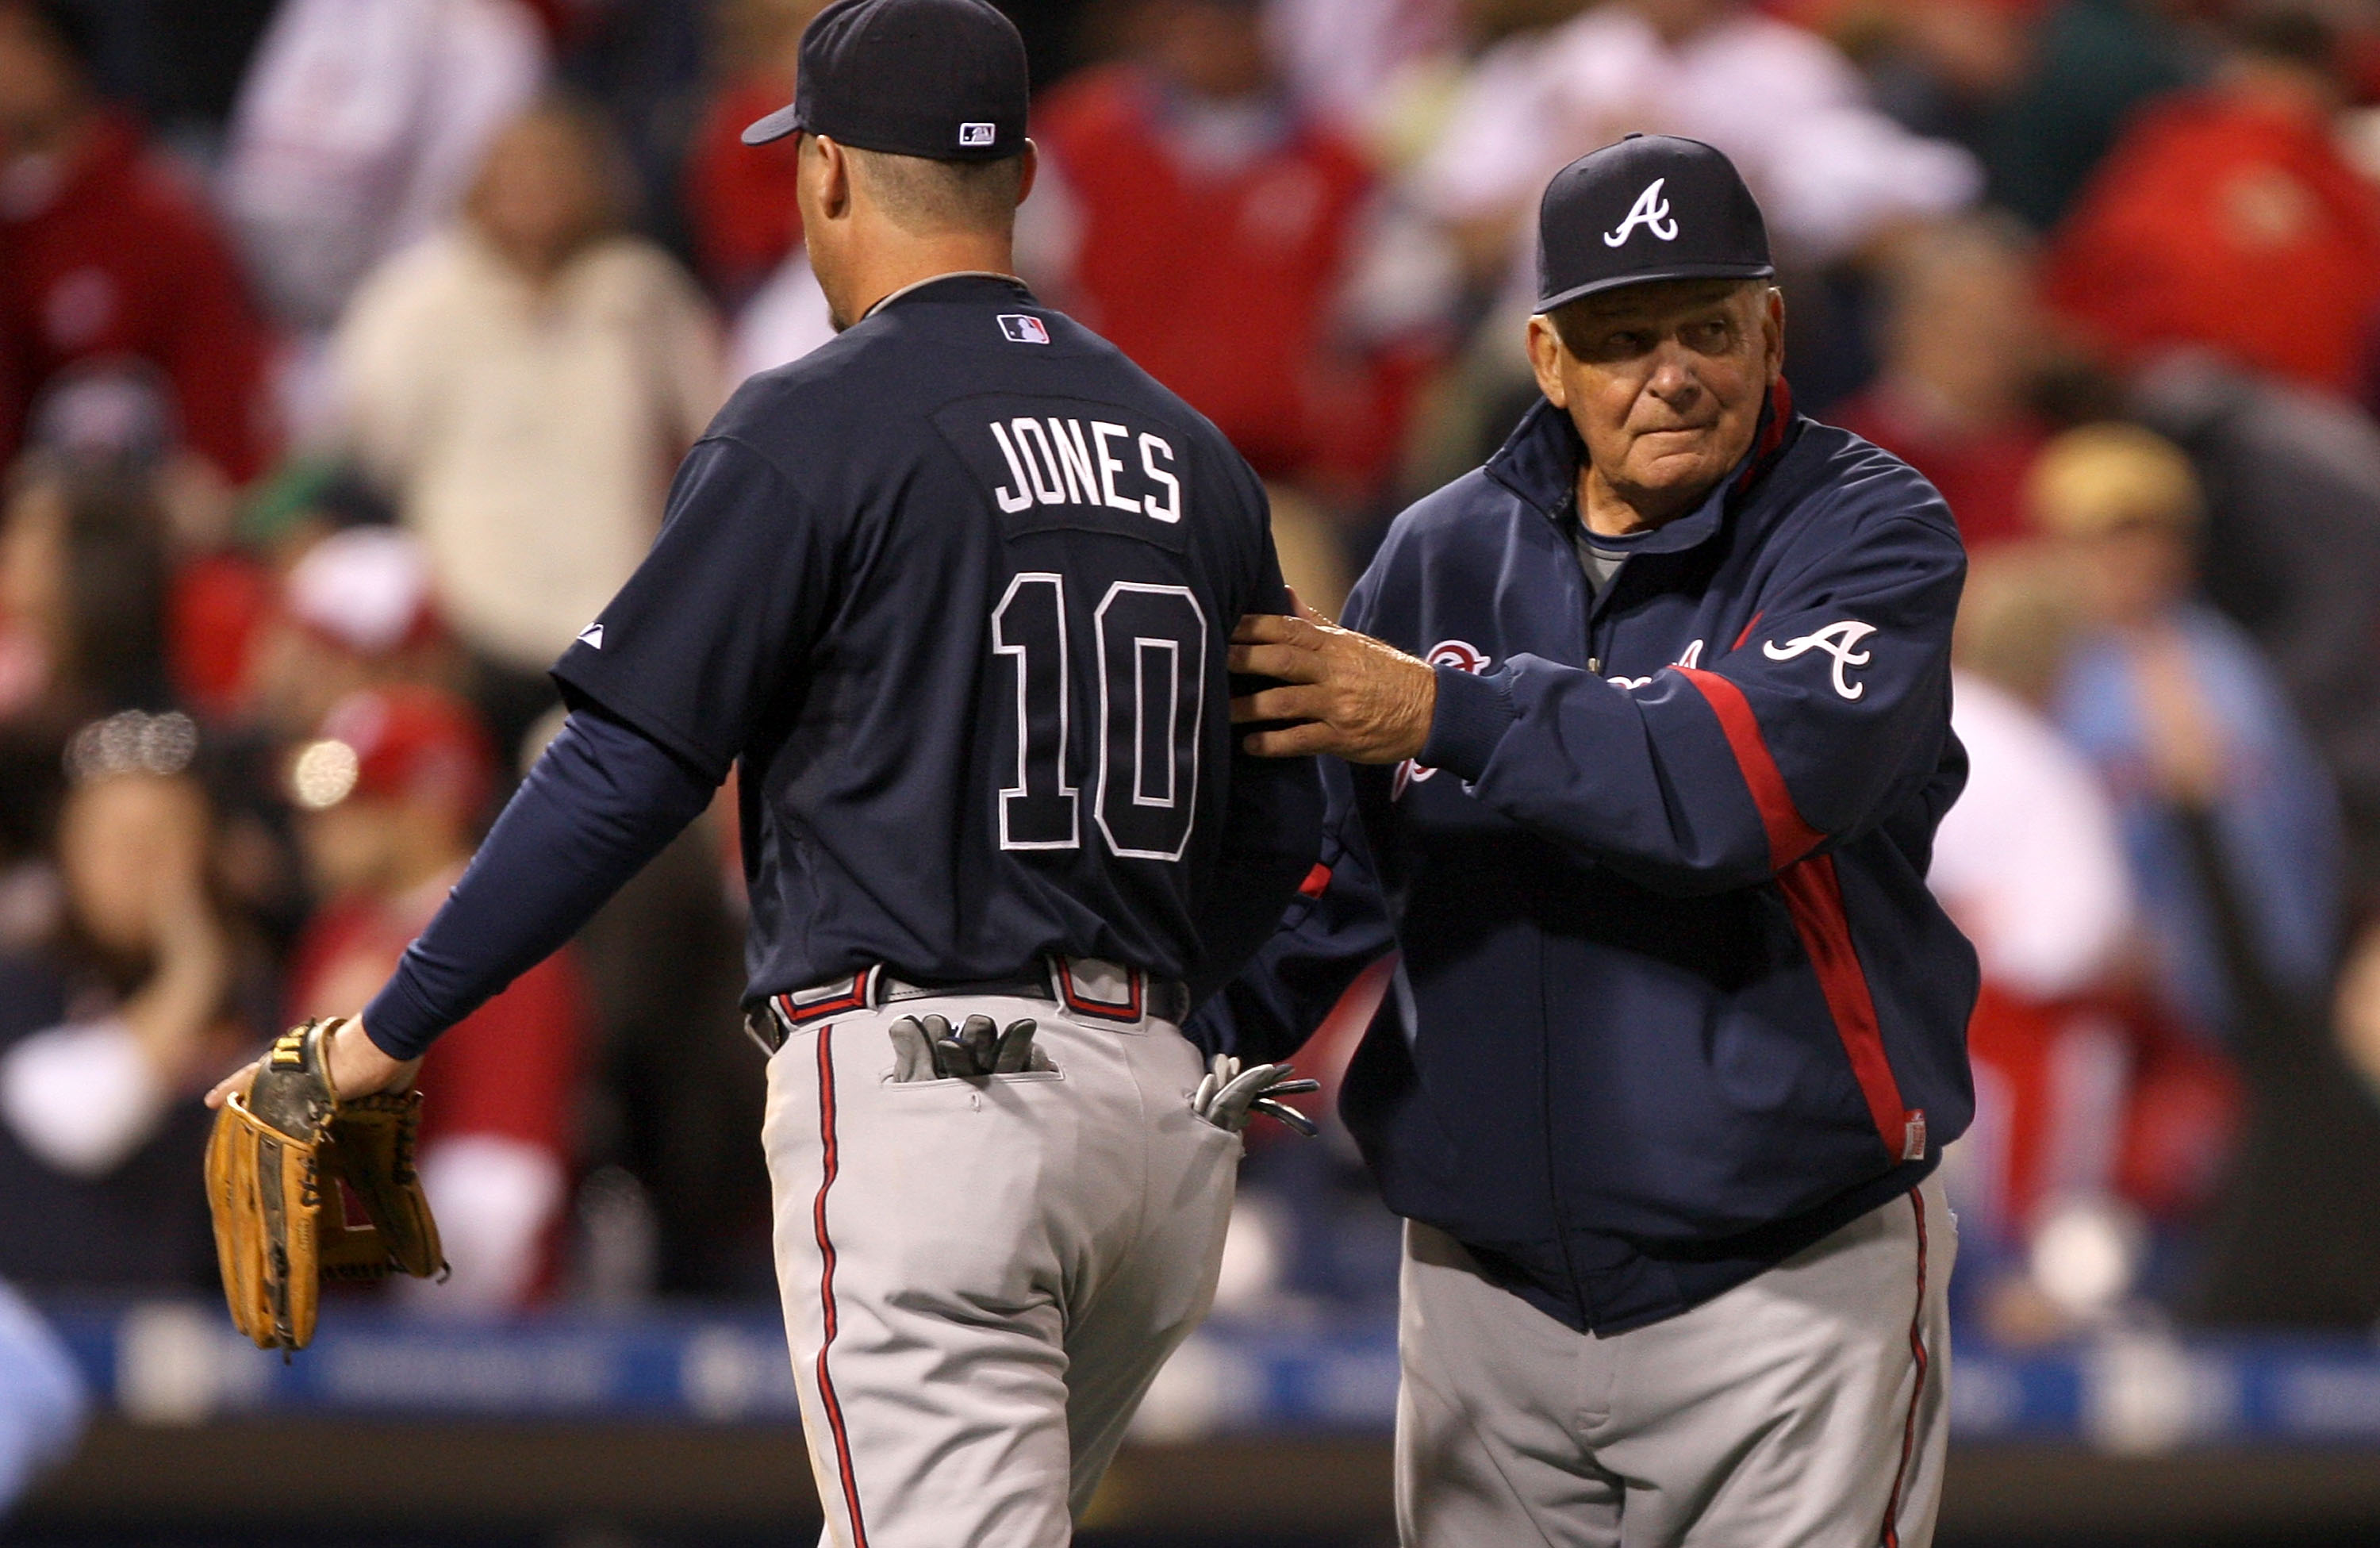 PHILADELPHIA - APRIL 05:  Chipper Jones #10 of the Atlanta Braves is congratulated by manager Bobby Cox after the Braves beat the Philadelphia Phillies on April 5, 2009 at Citizens Bank Park in Philadelphia, Pennsylvania. Today's game is the opening of th